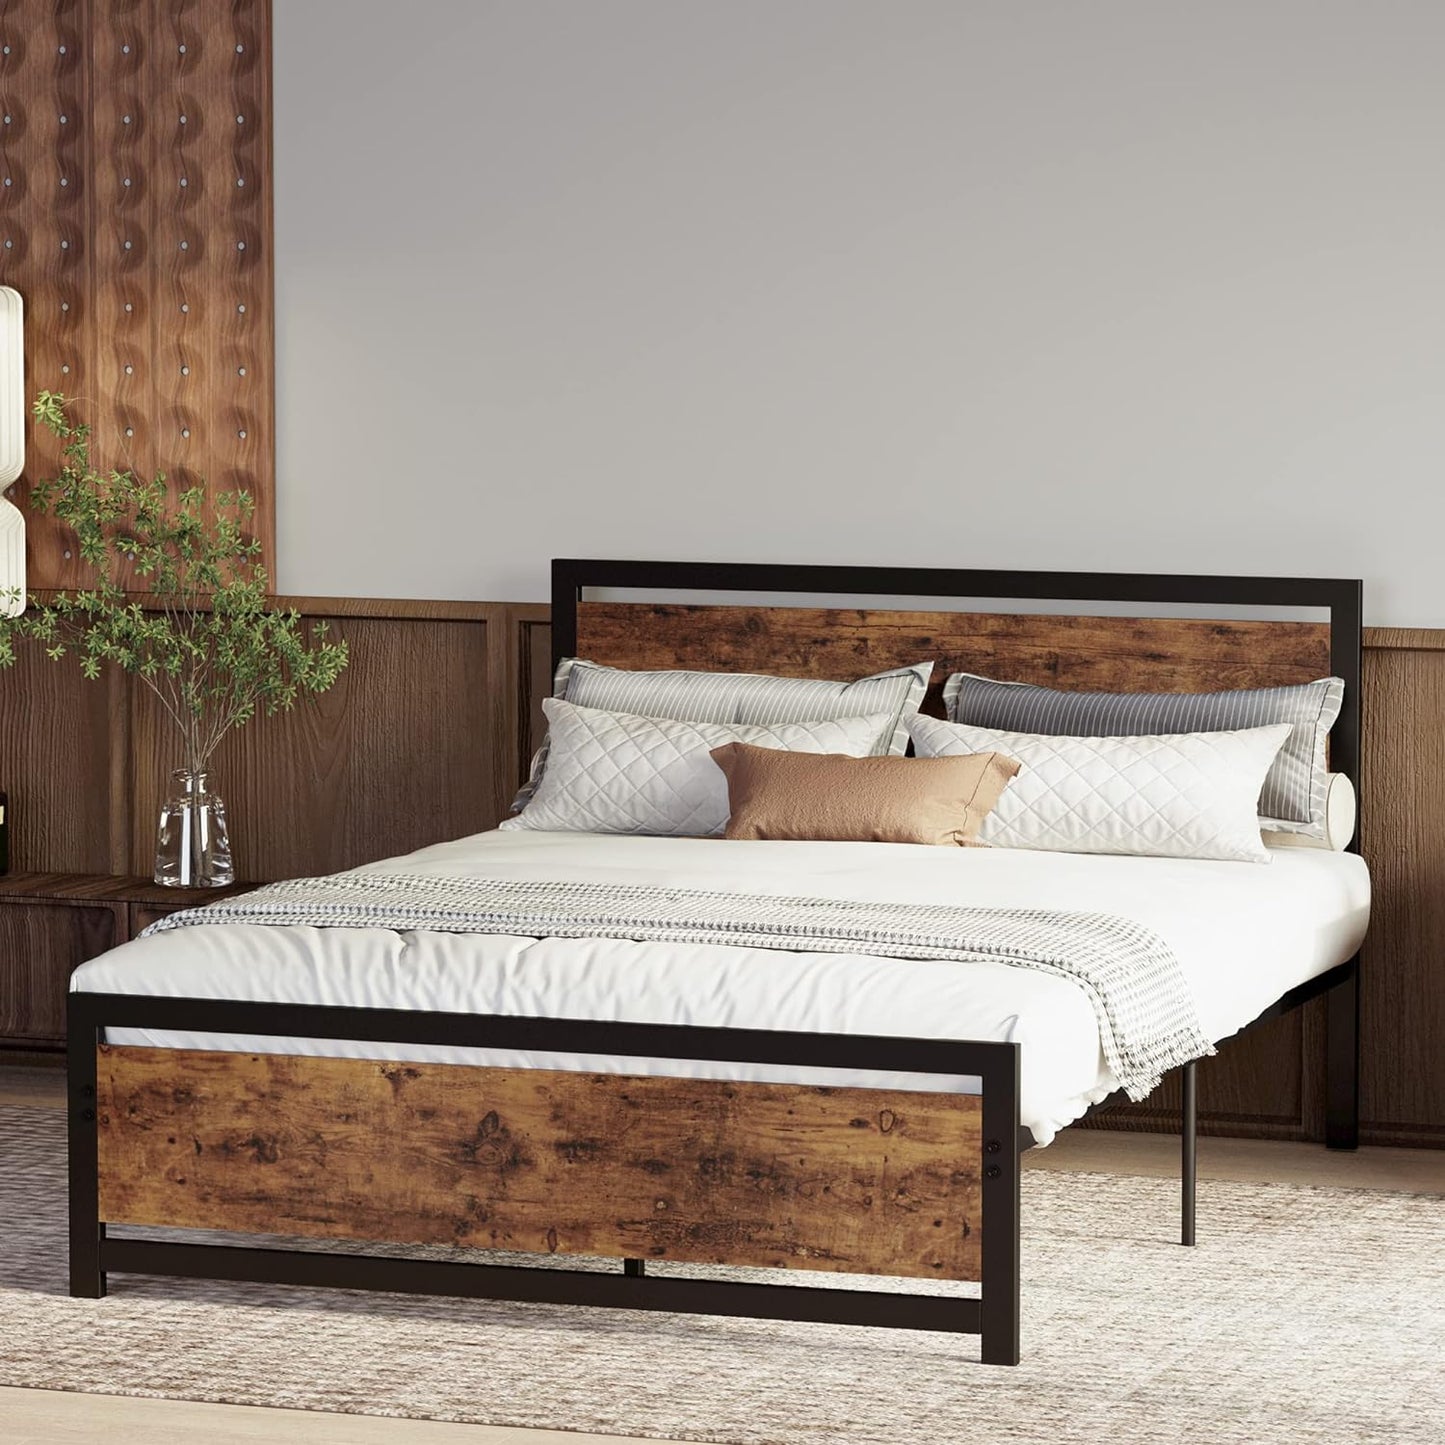 IRONCK Full Bed Frame with Headboard and Footboard